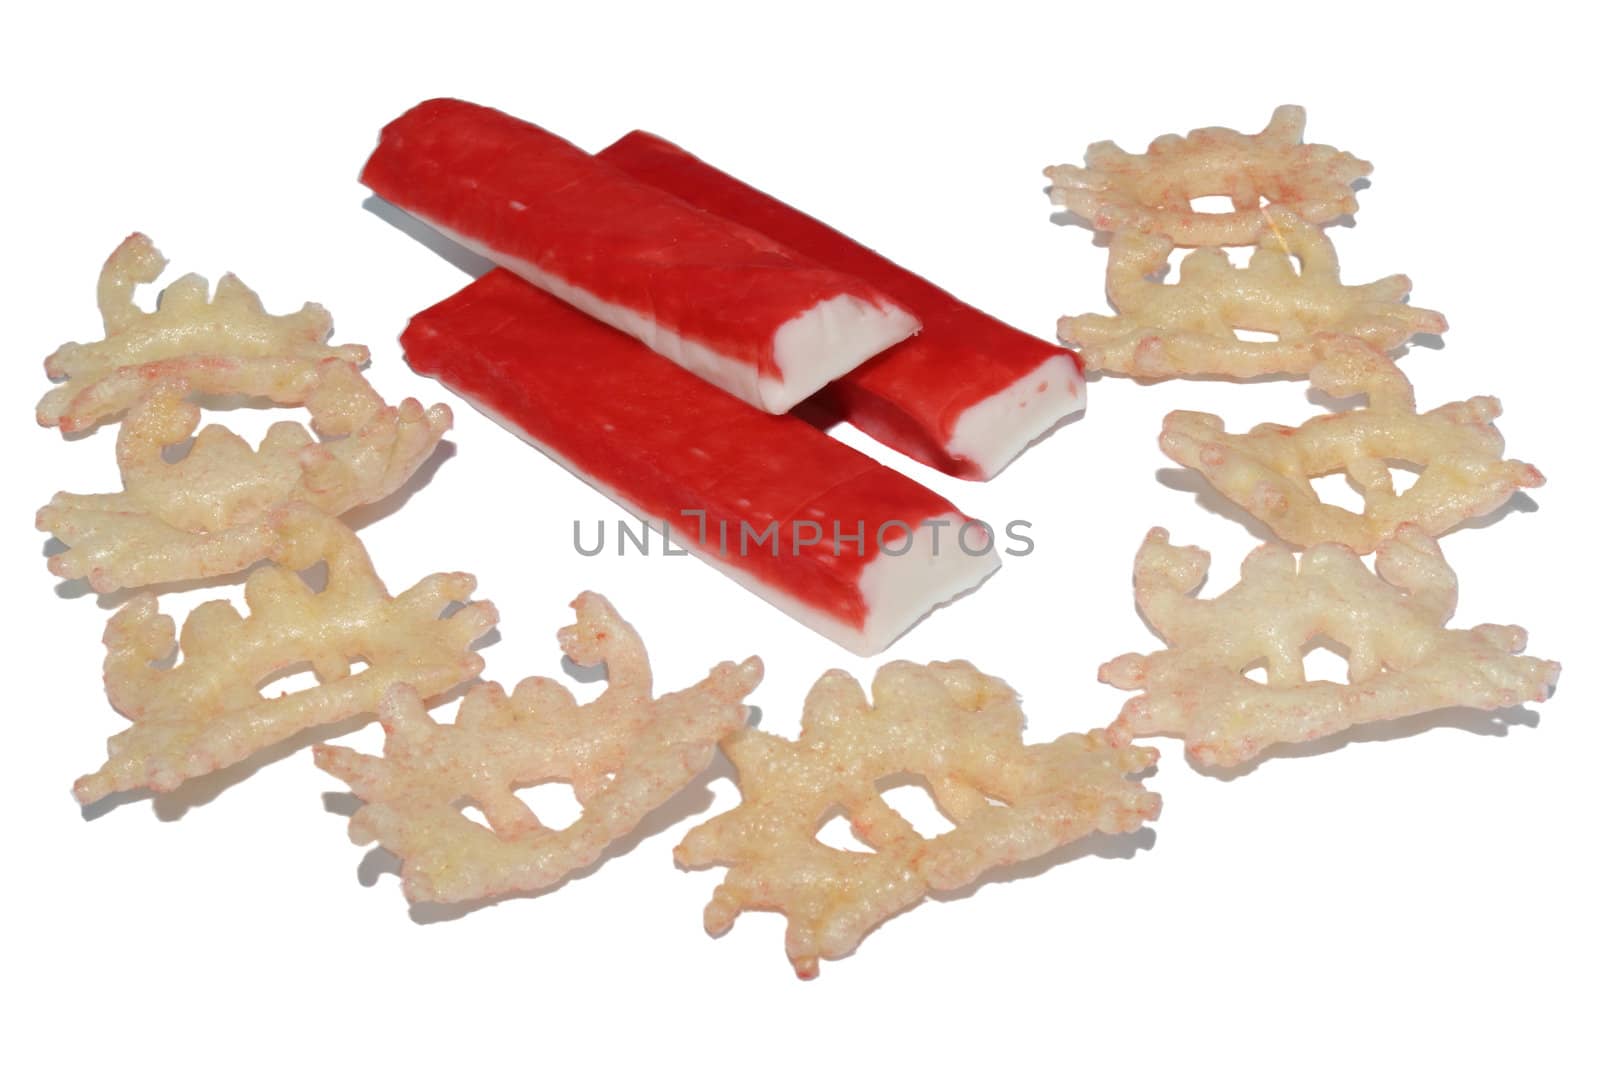 Snacks (chips) with taste of the crab and crab sticks on a white background